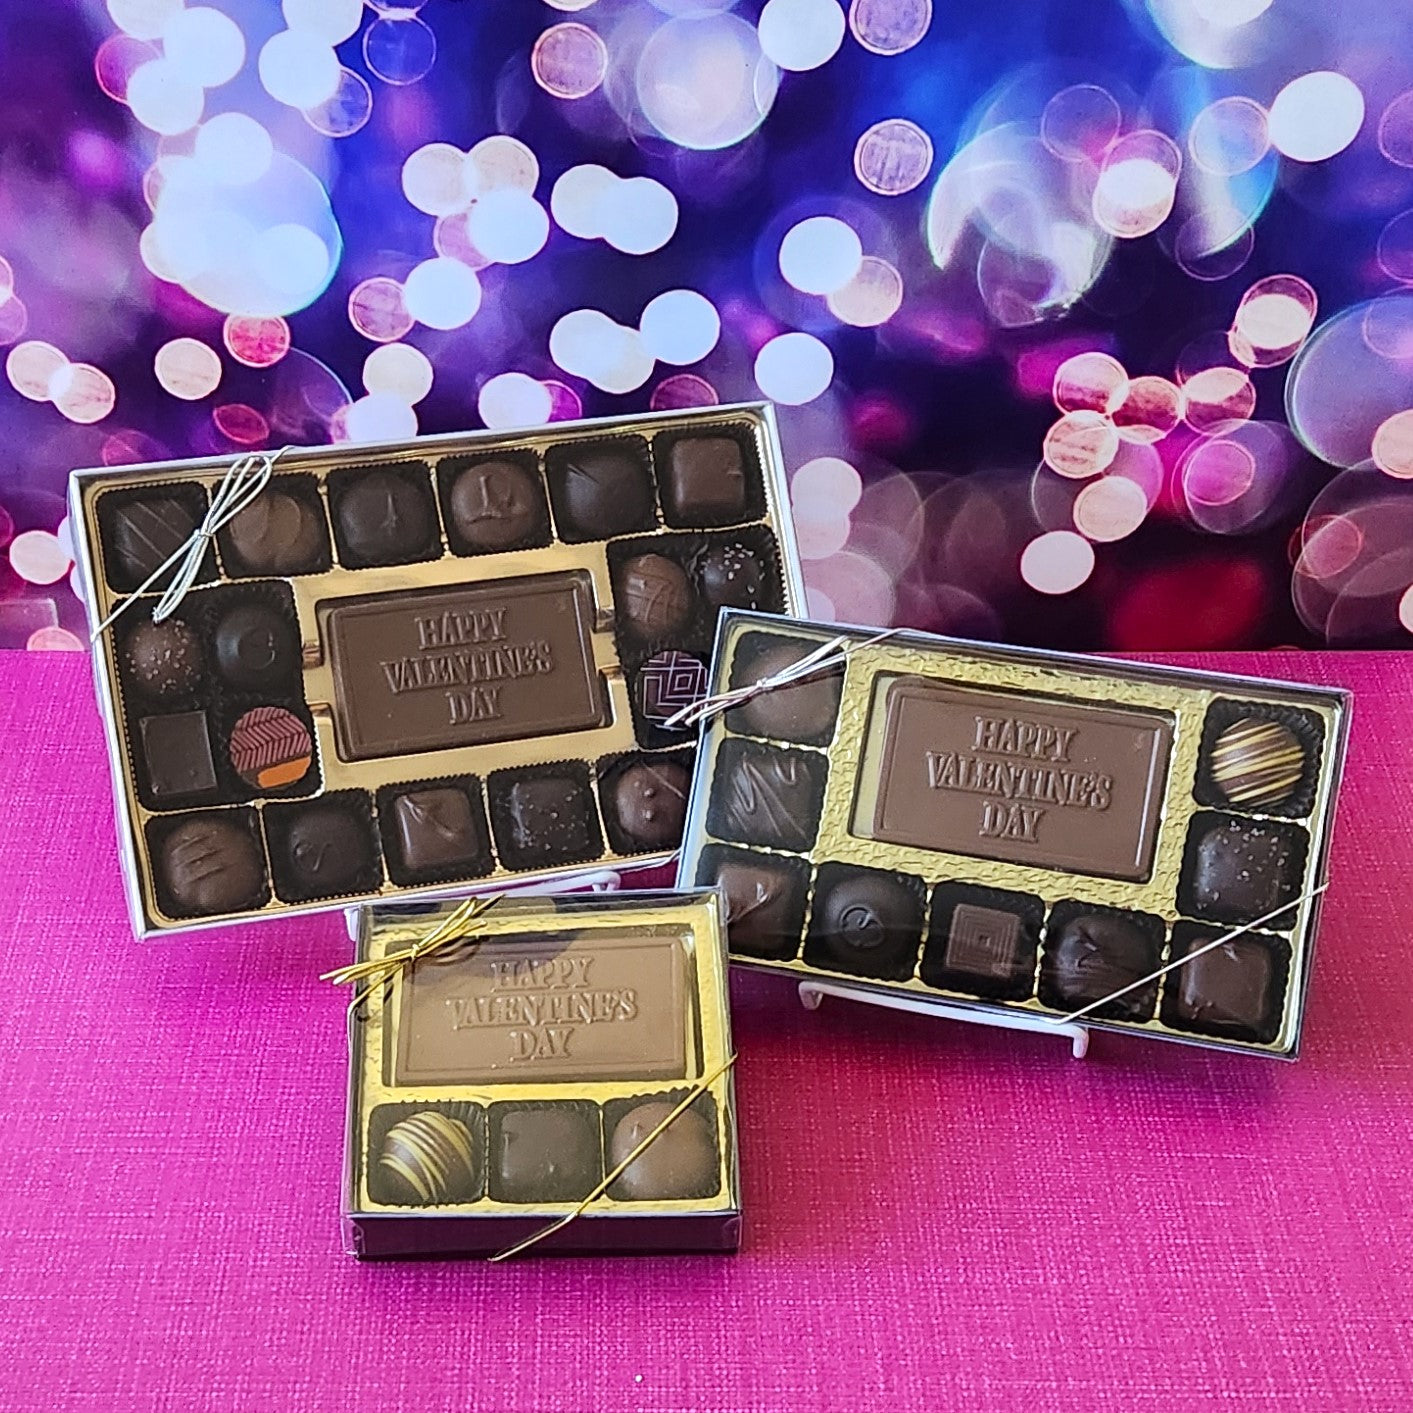 The perfect gift for Valentine's Day. Our box of milk and dark chocolate soft centers, truffles, and caramels are sure to please. Available in 3 different sizes.